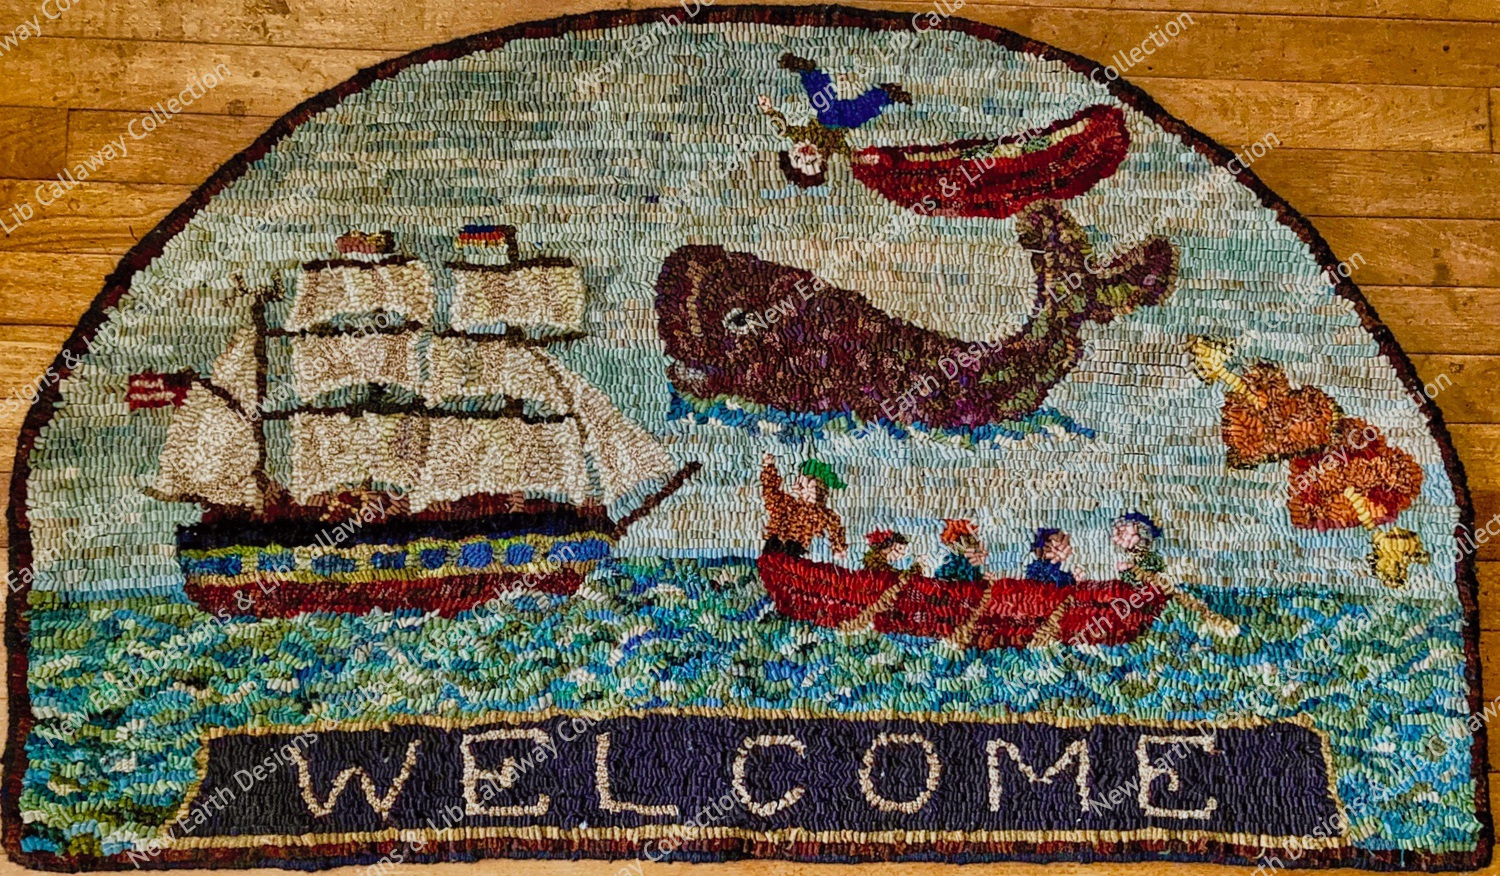 Whale Welcome #9